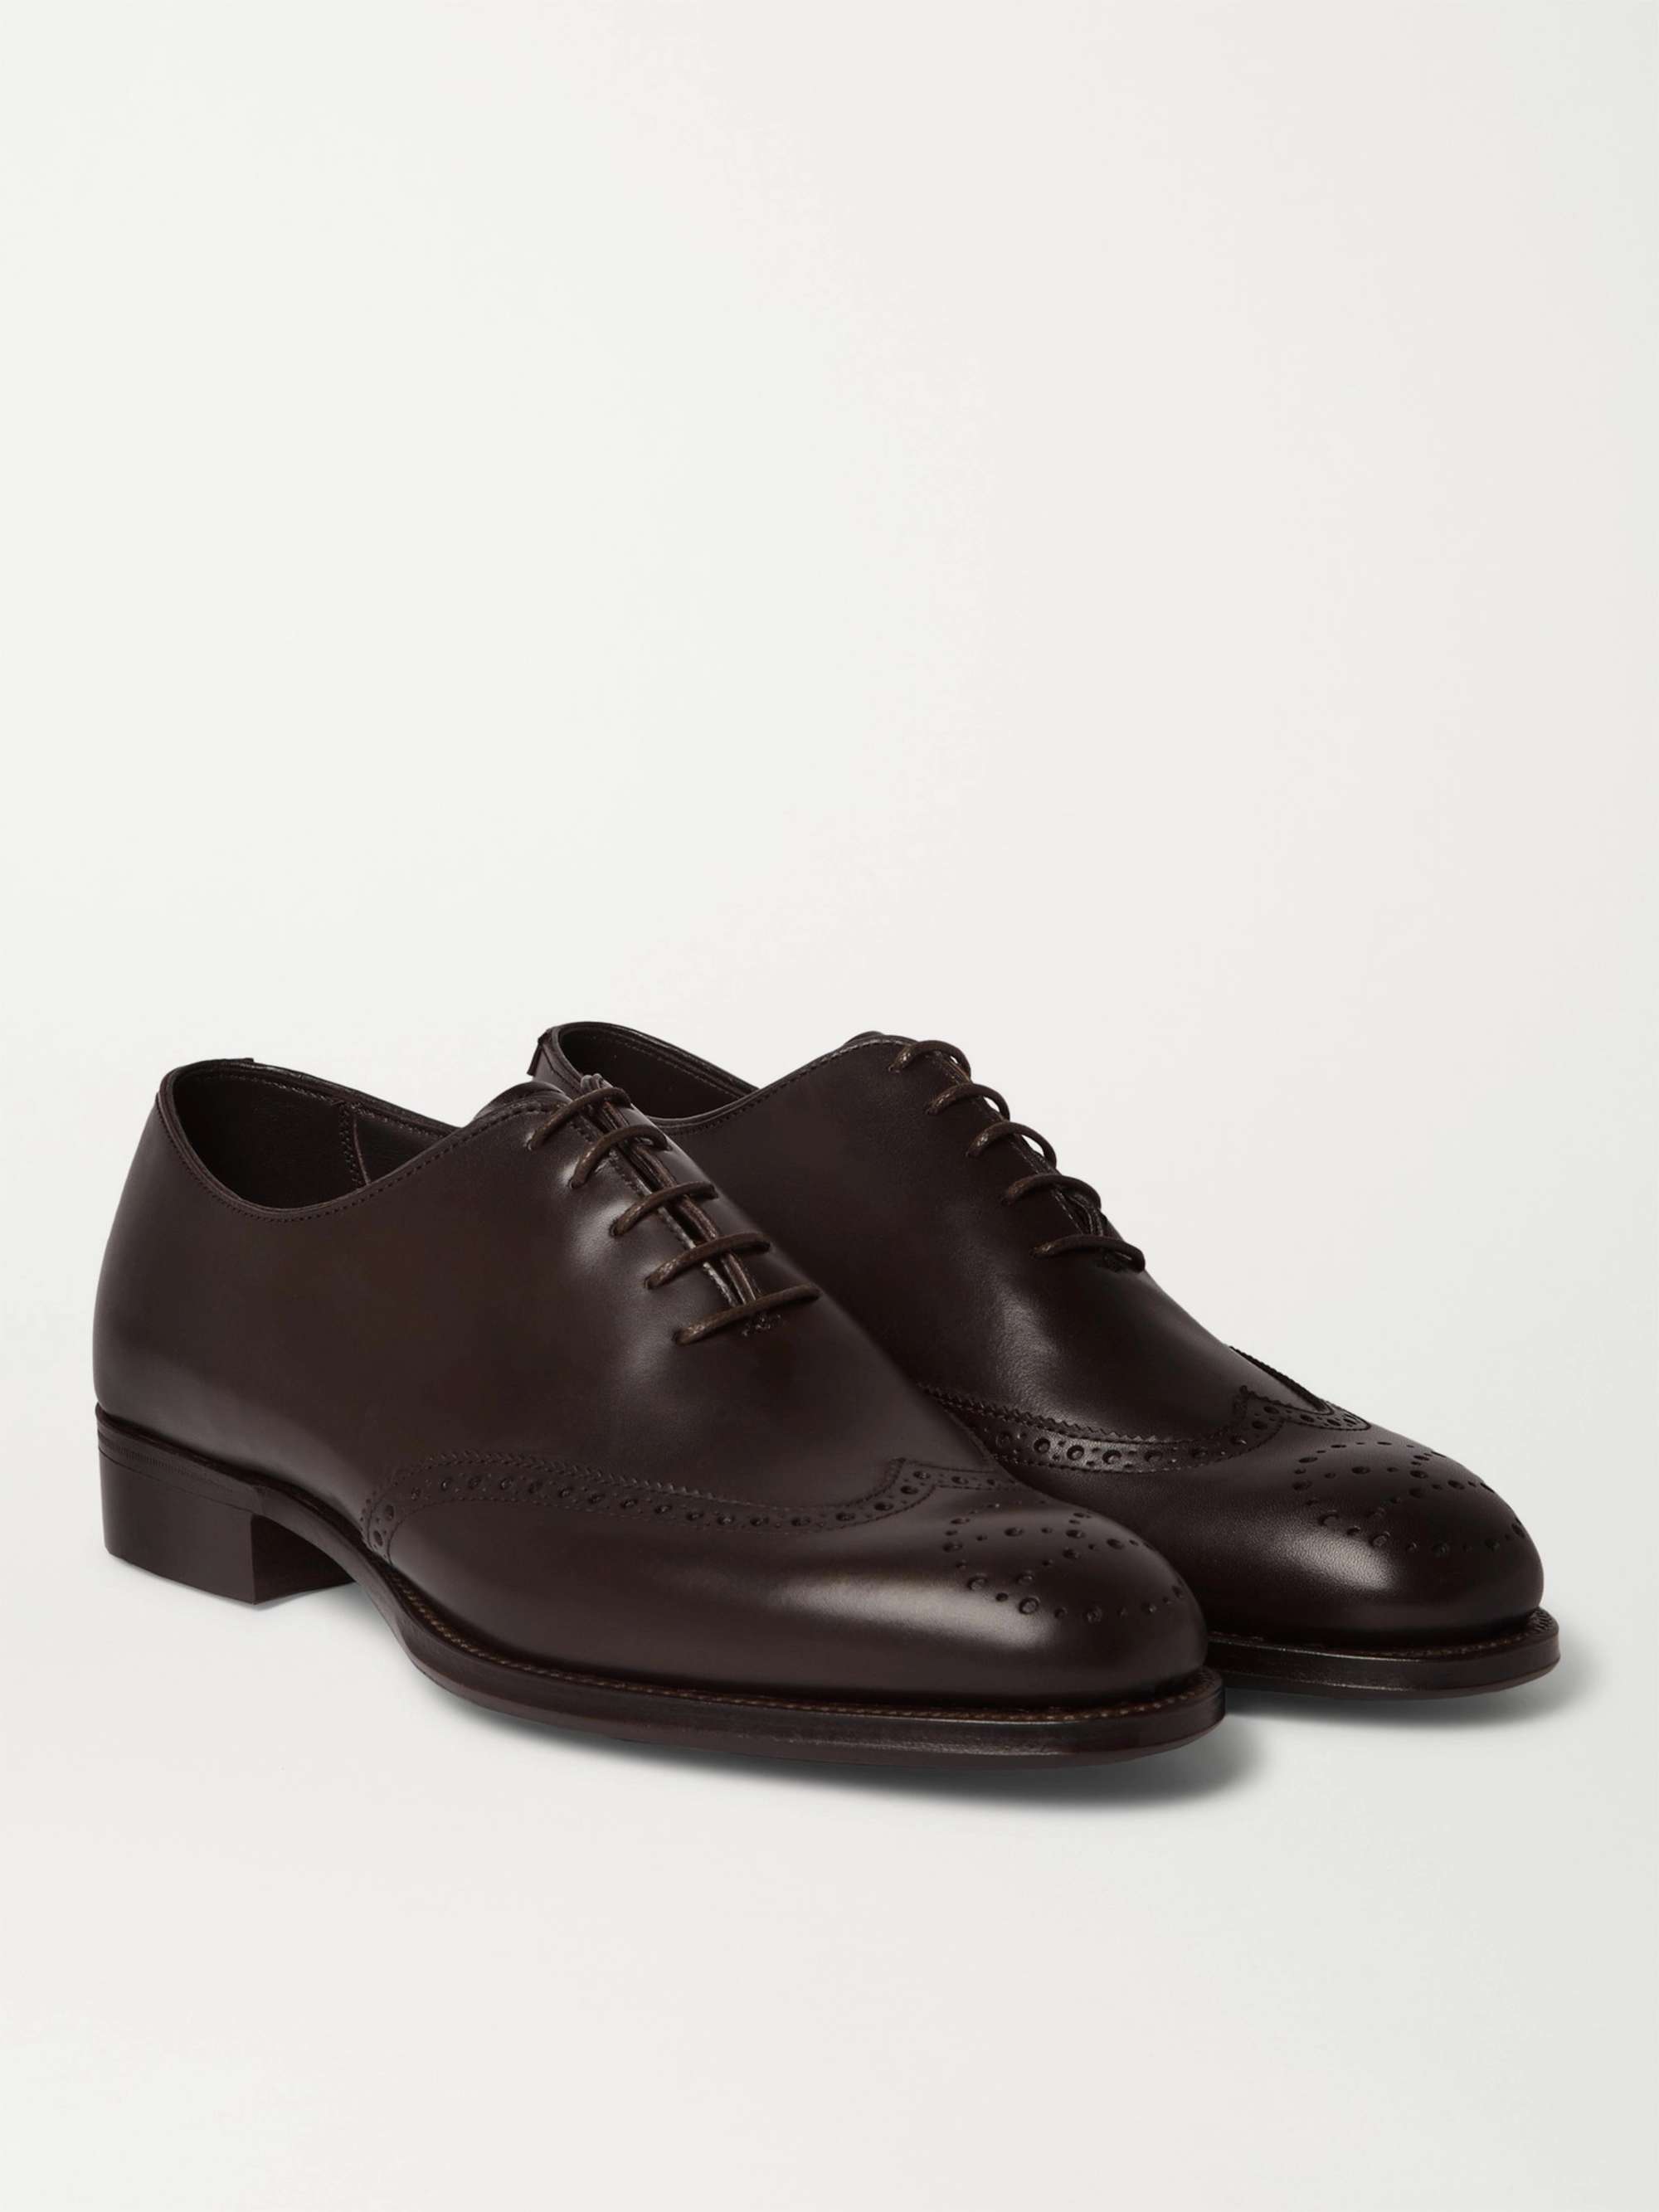 KINGSMAN + George Cleverley Leather Brogues